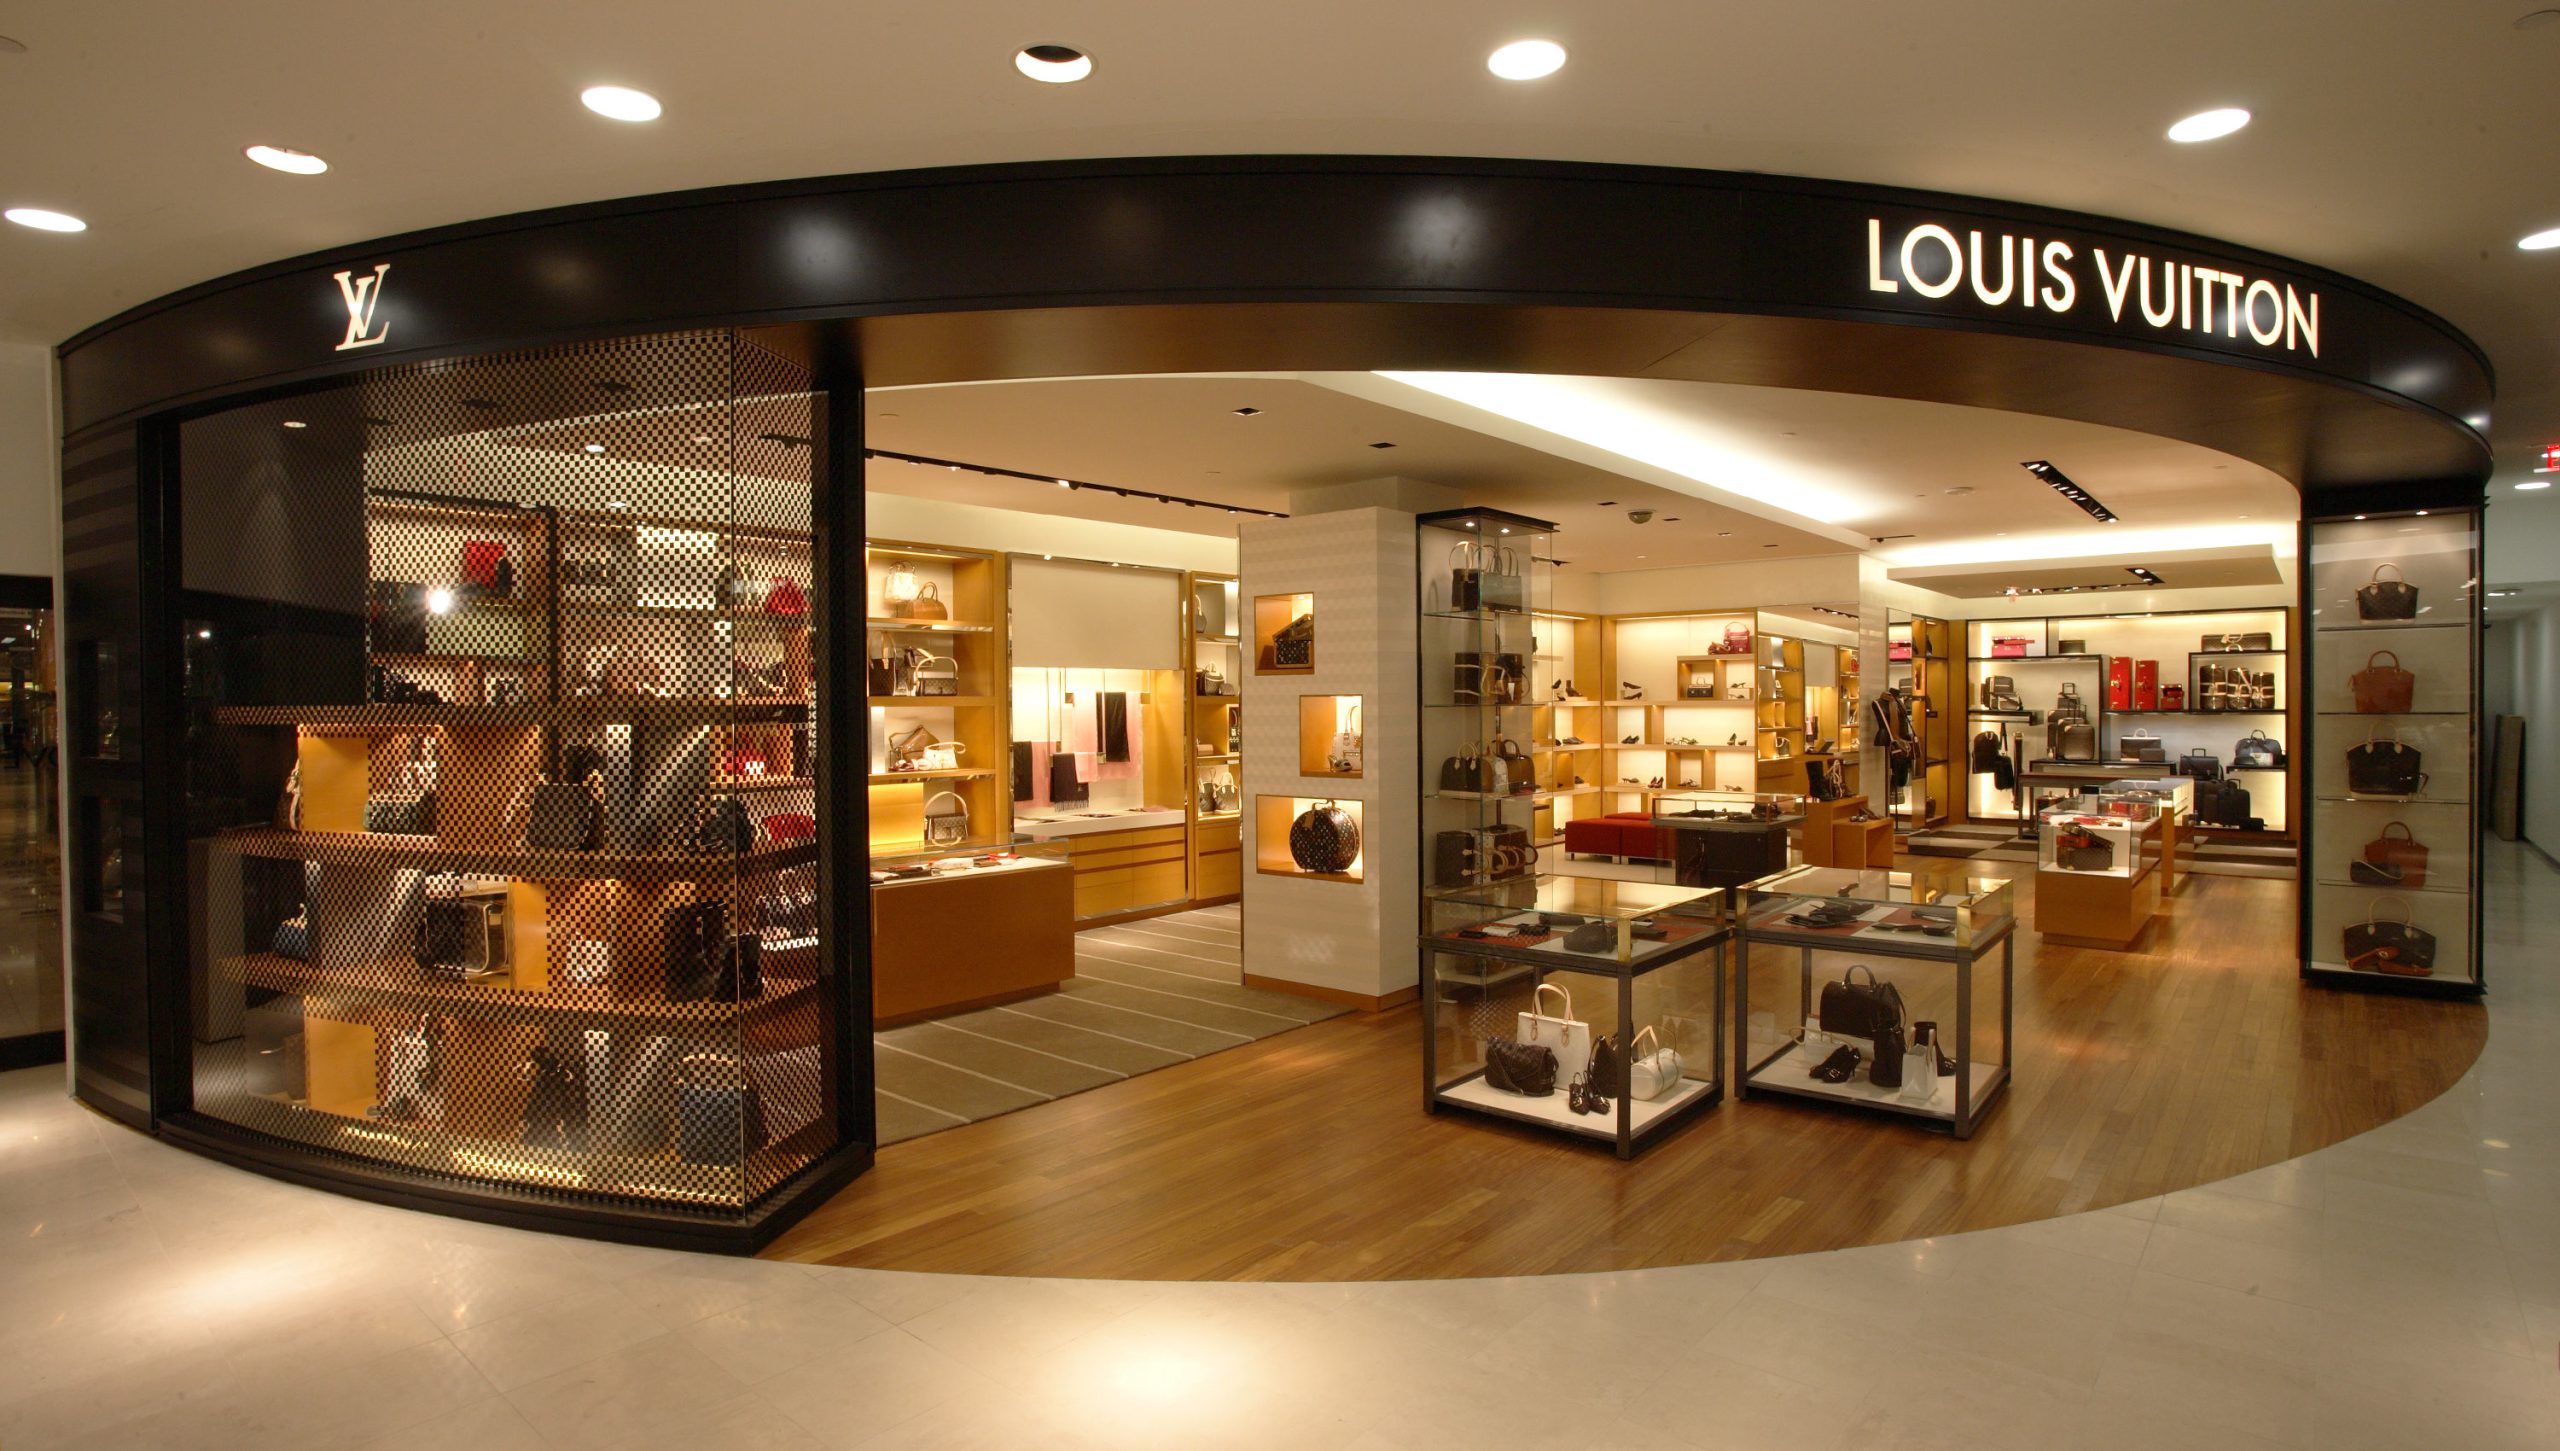 Louis Vuitton return policy store